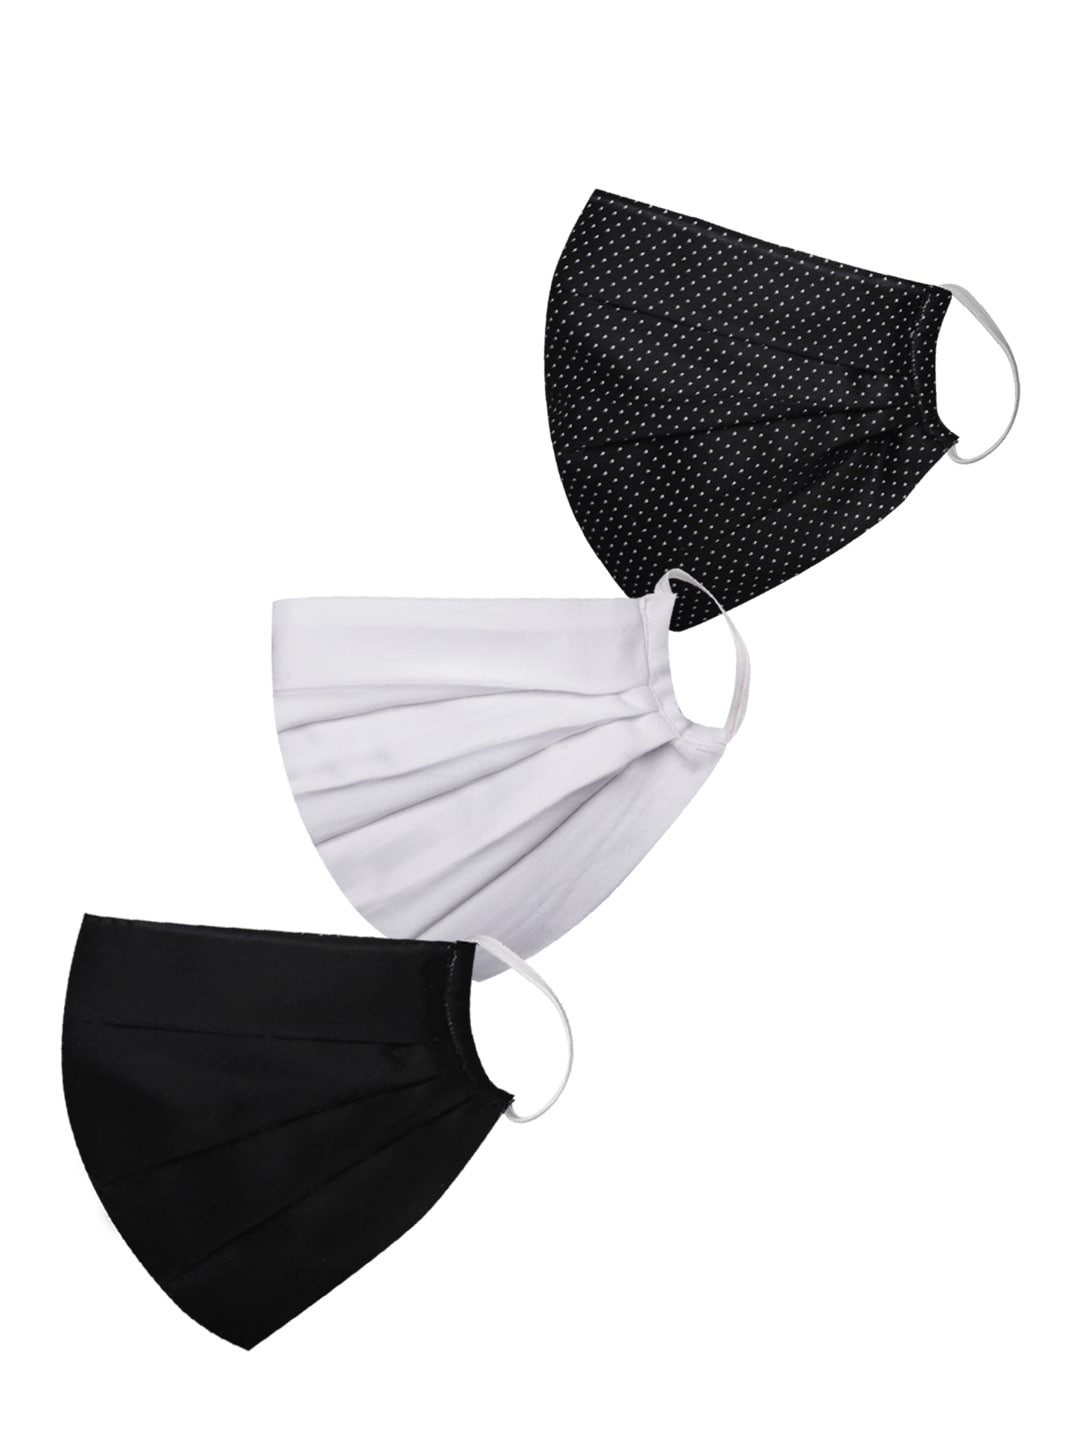 VASTRAMAY Unisex Set of 3 Reusable 2-Ply Pleated Protective Outdoor Cloth Face Masks Price in India